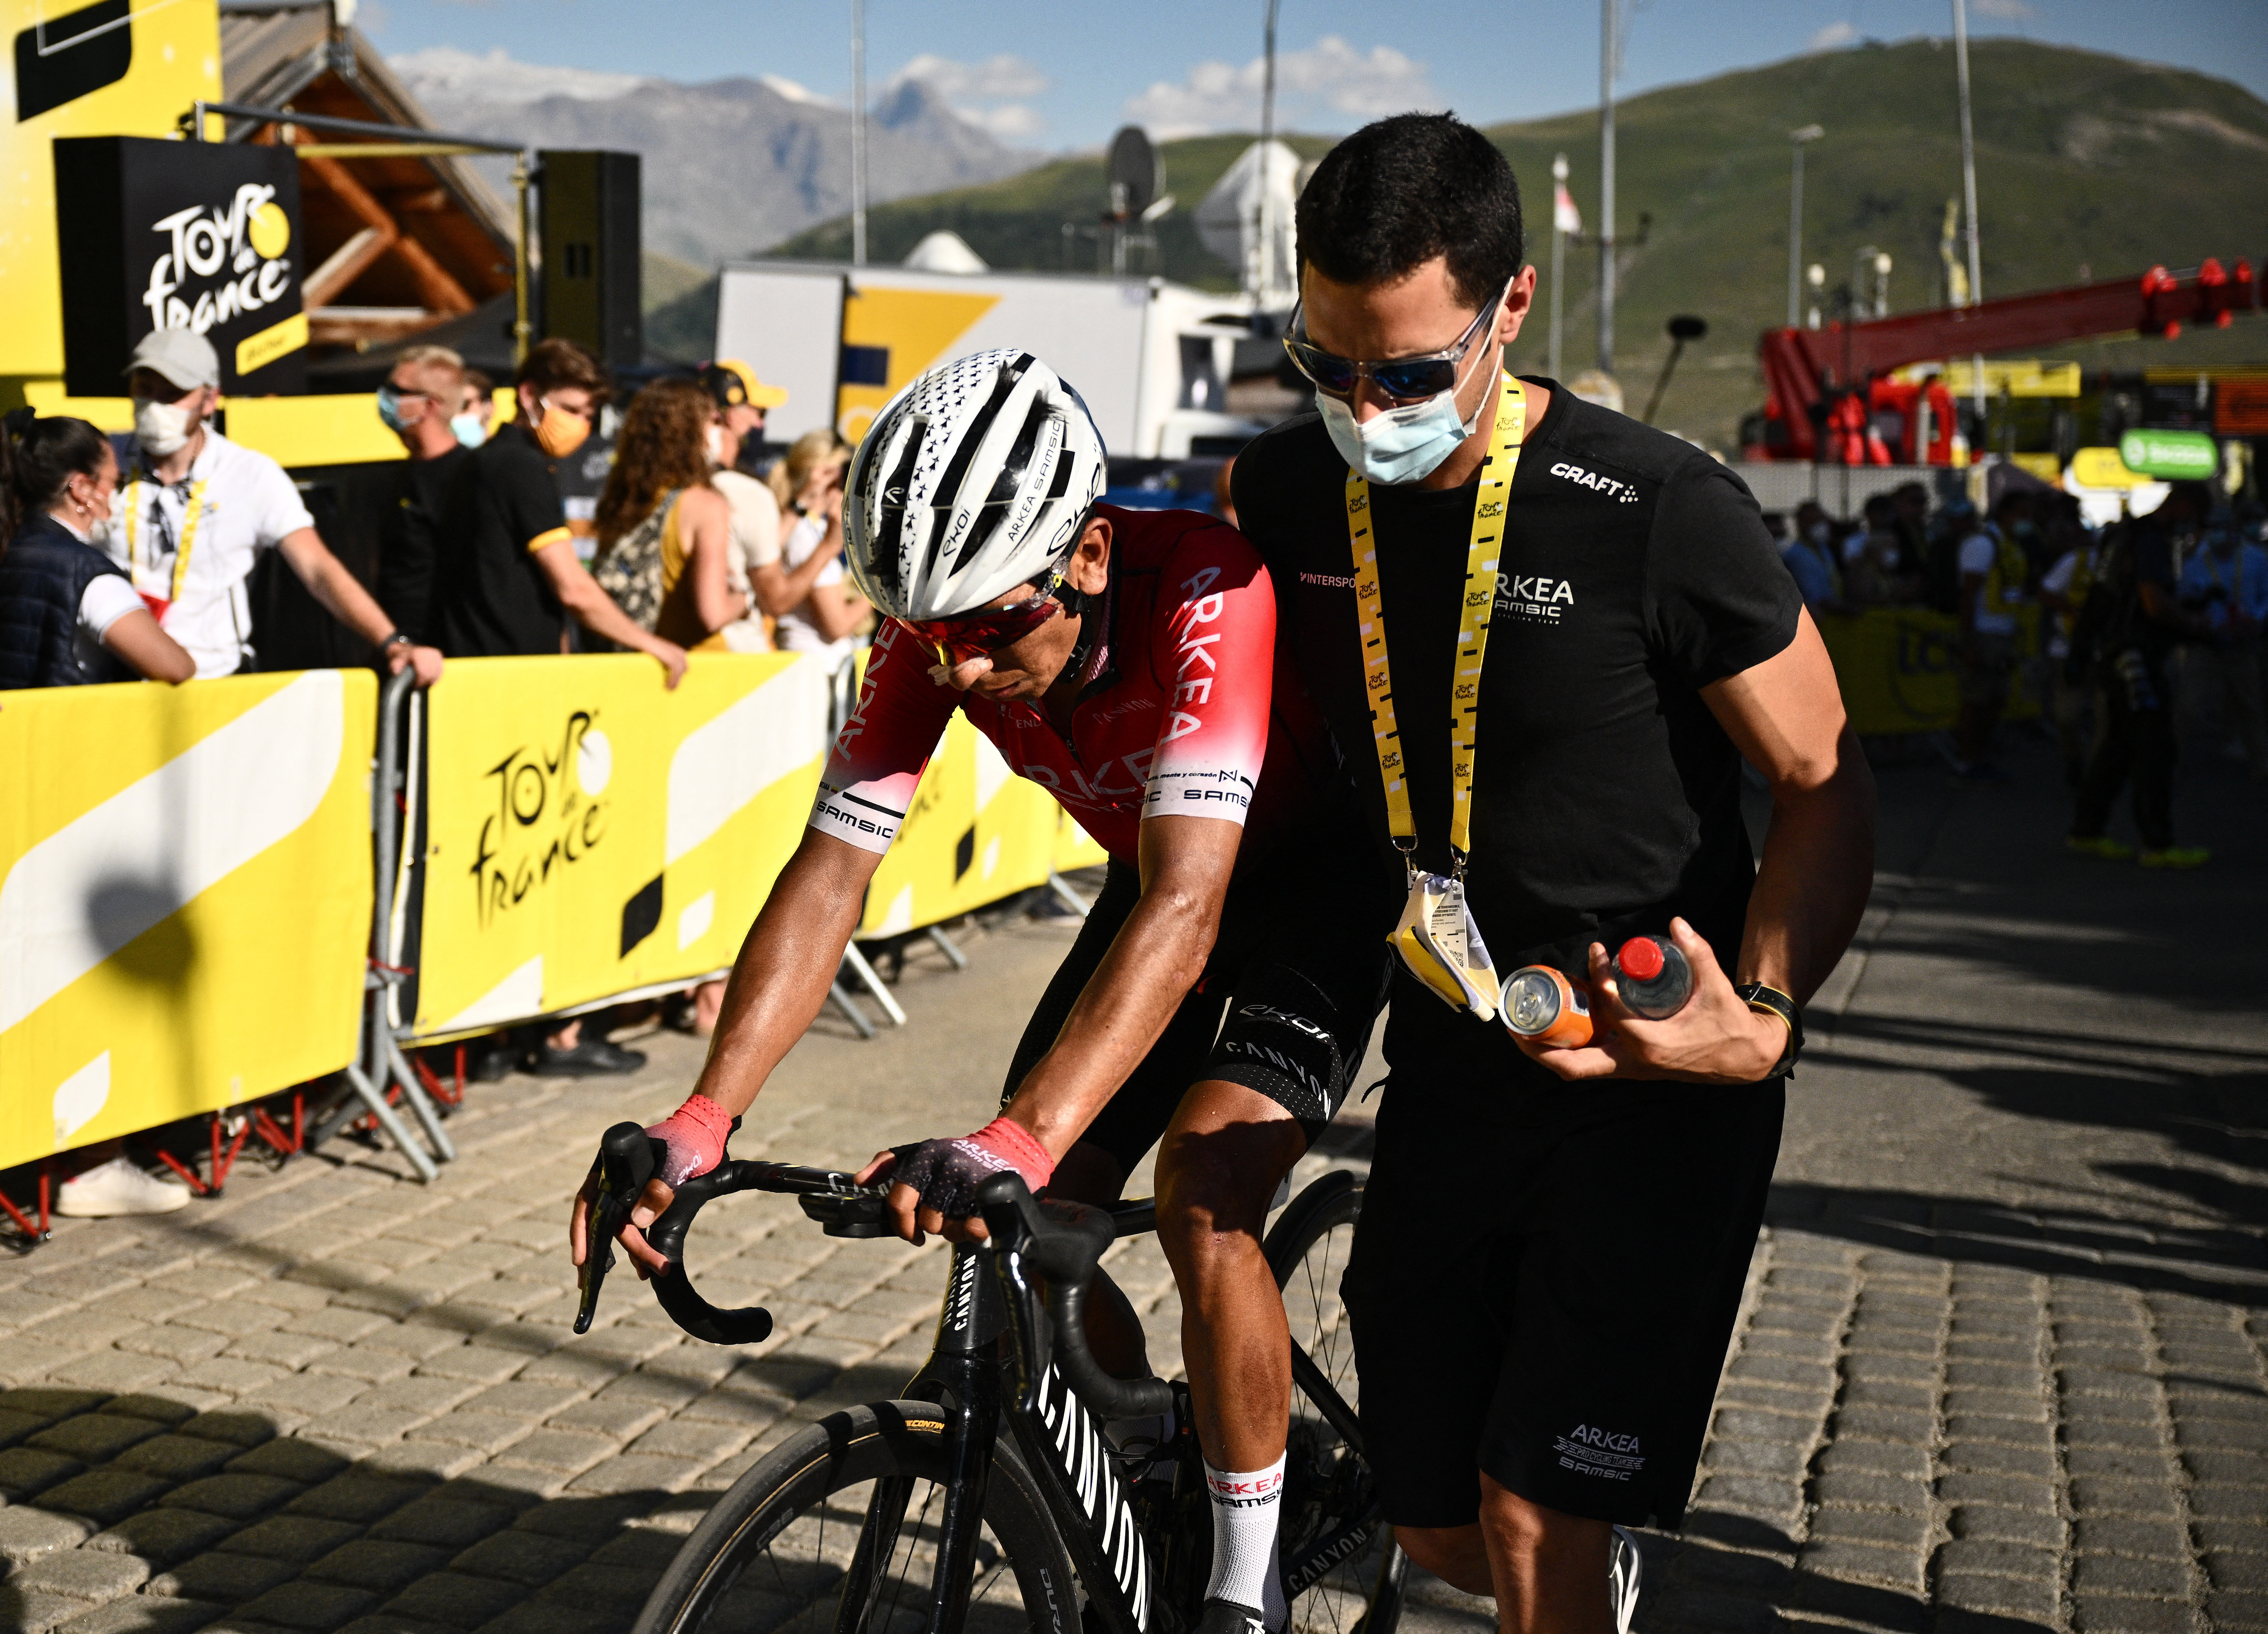 Cycling - Tour de France - Stage 12 - Briancon to Alpe d'Huez - France - July 14, 2022 Team Arkea - Samsic's Nairo Quintana is seen after stage 12 Pool via REUTERS/Marco Bertorello